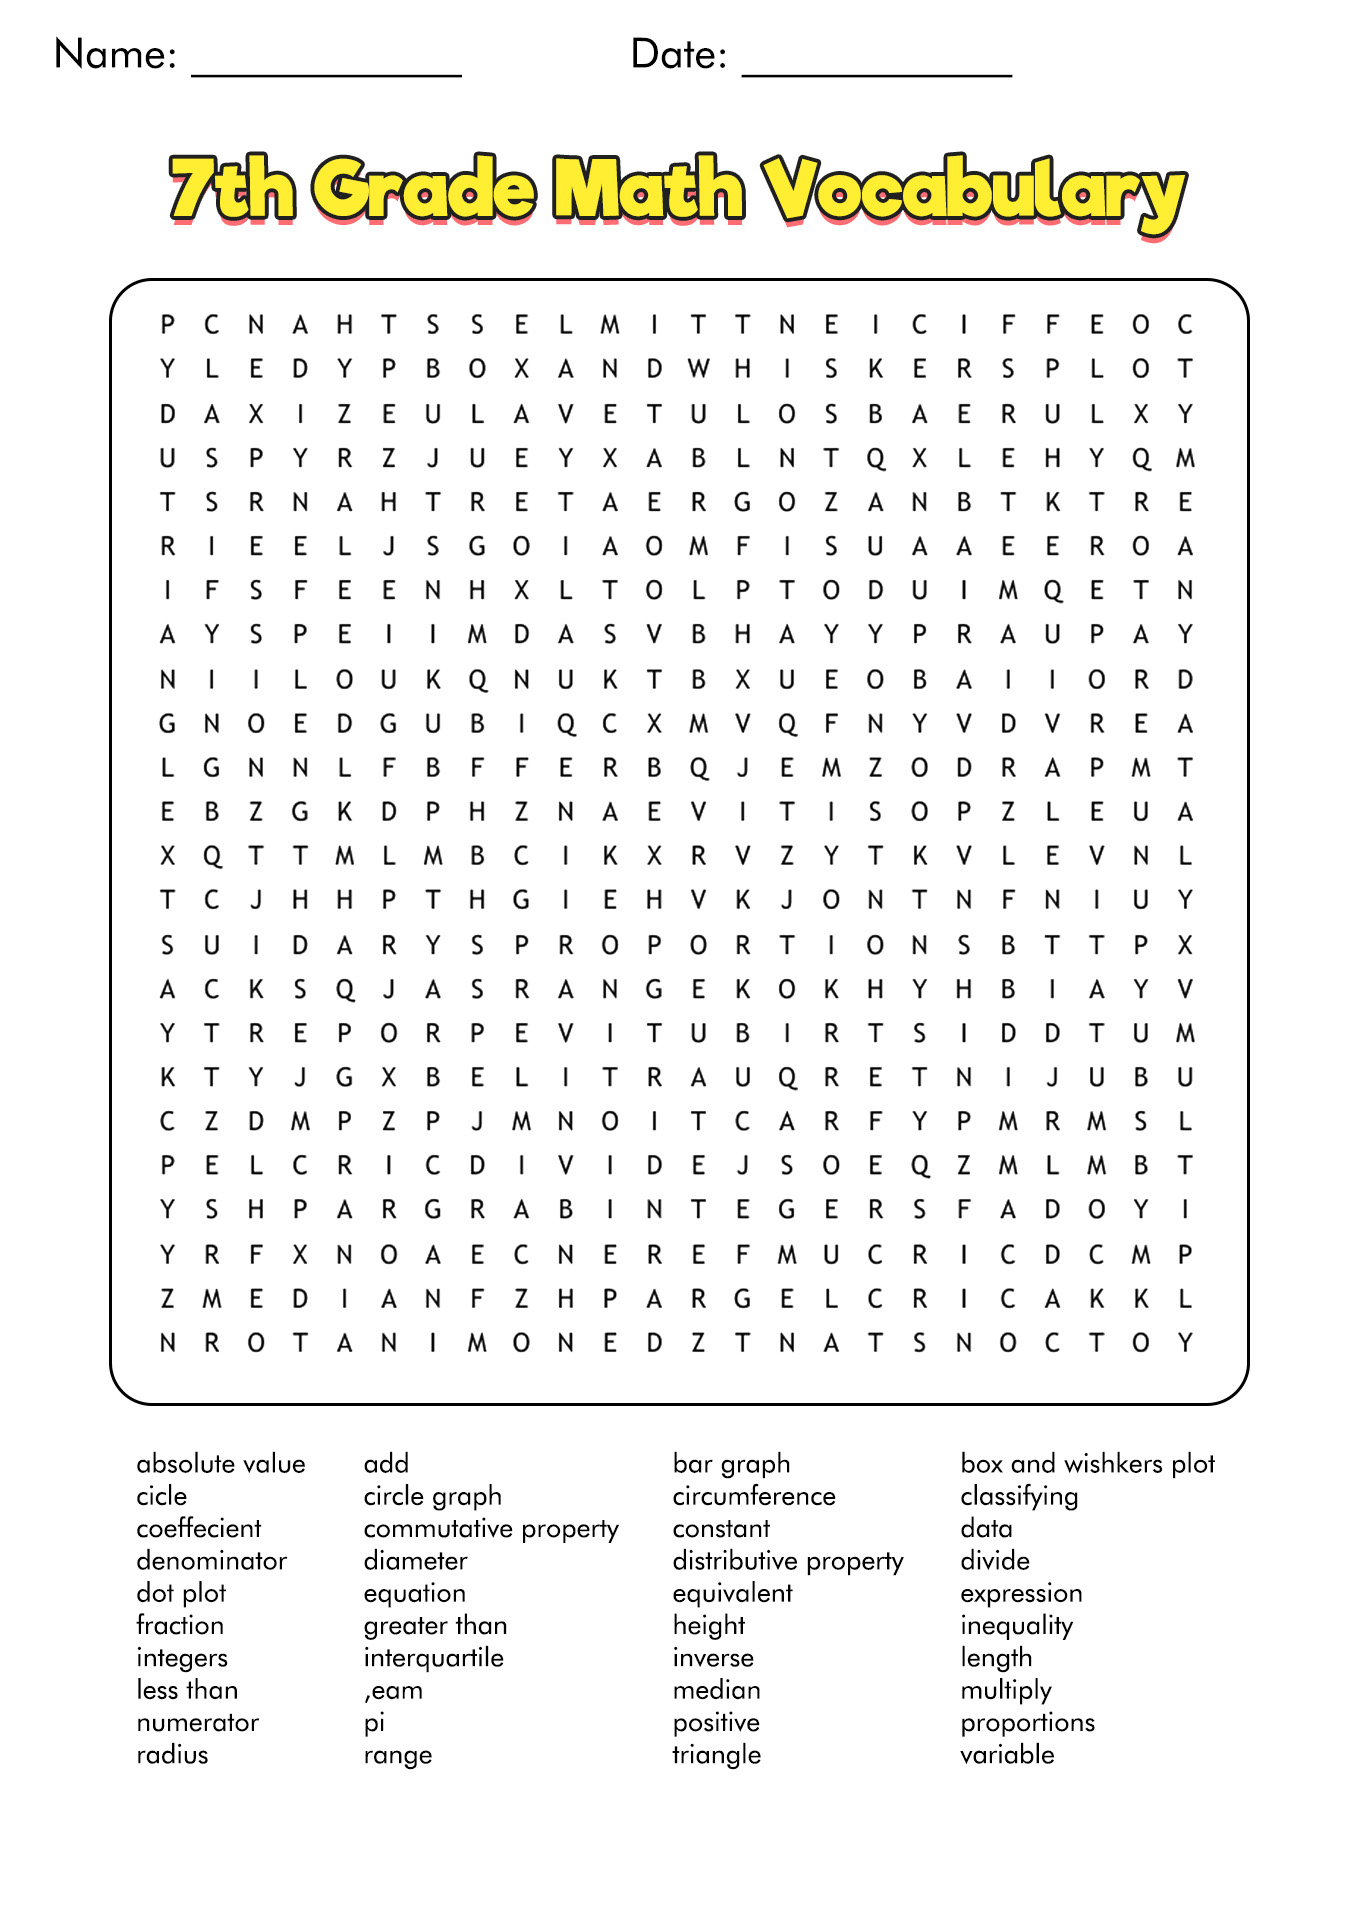 17-best-images-of-7th-grade-vocabulary-worksheets-7th-grade-vocabulary-word-lists-7th-grade